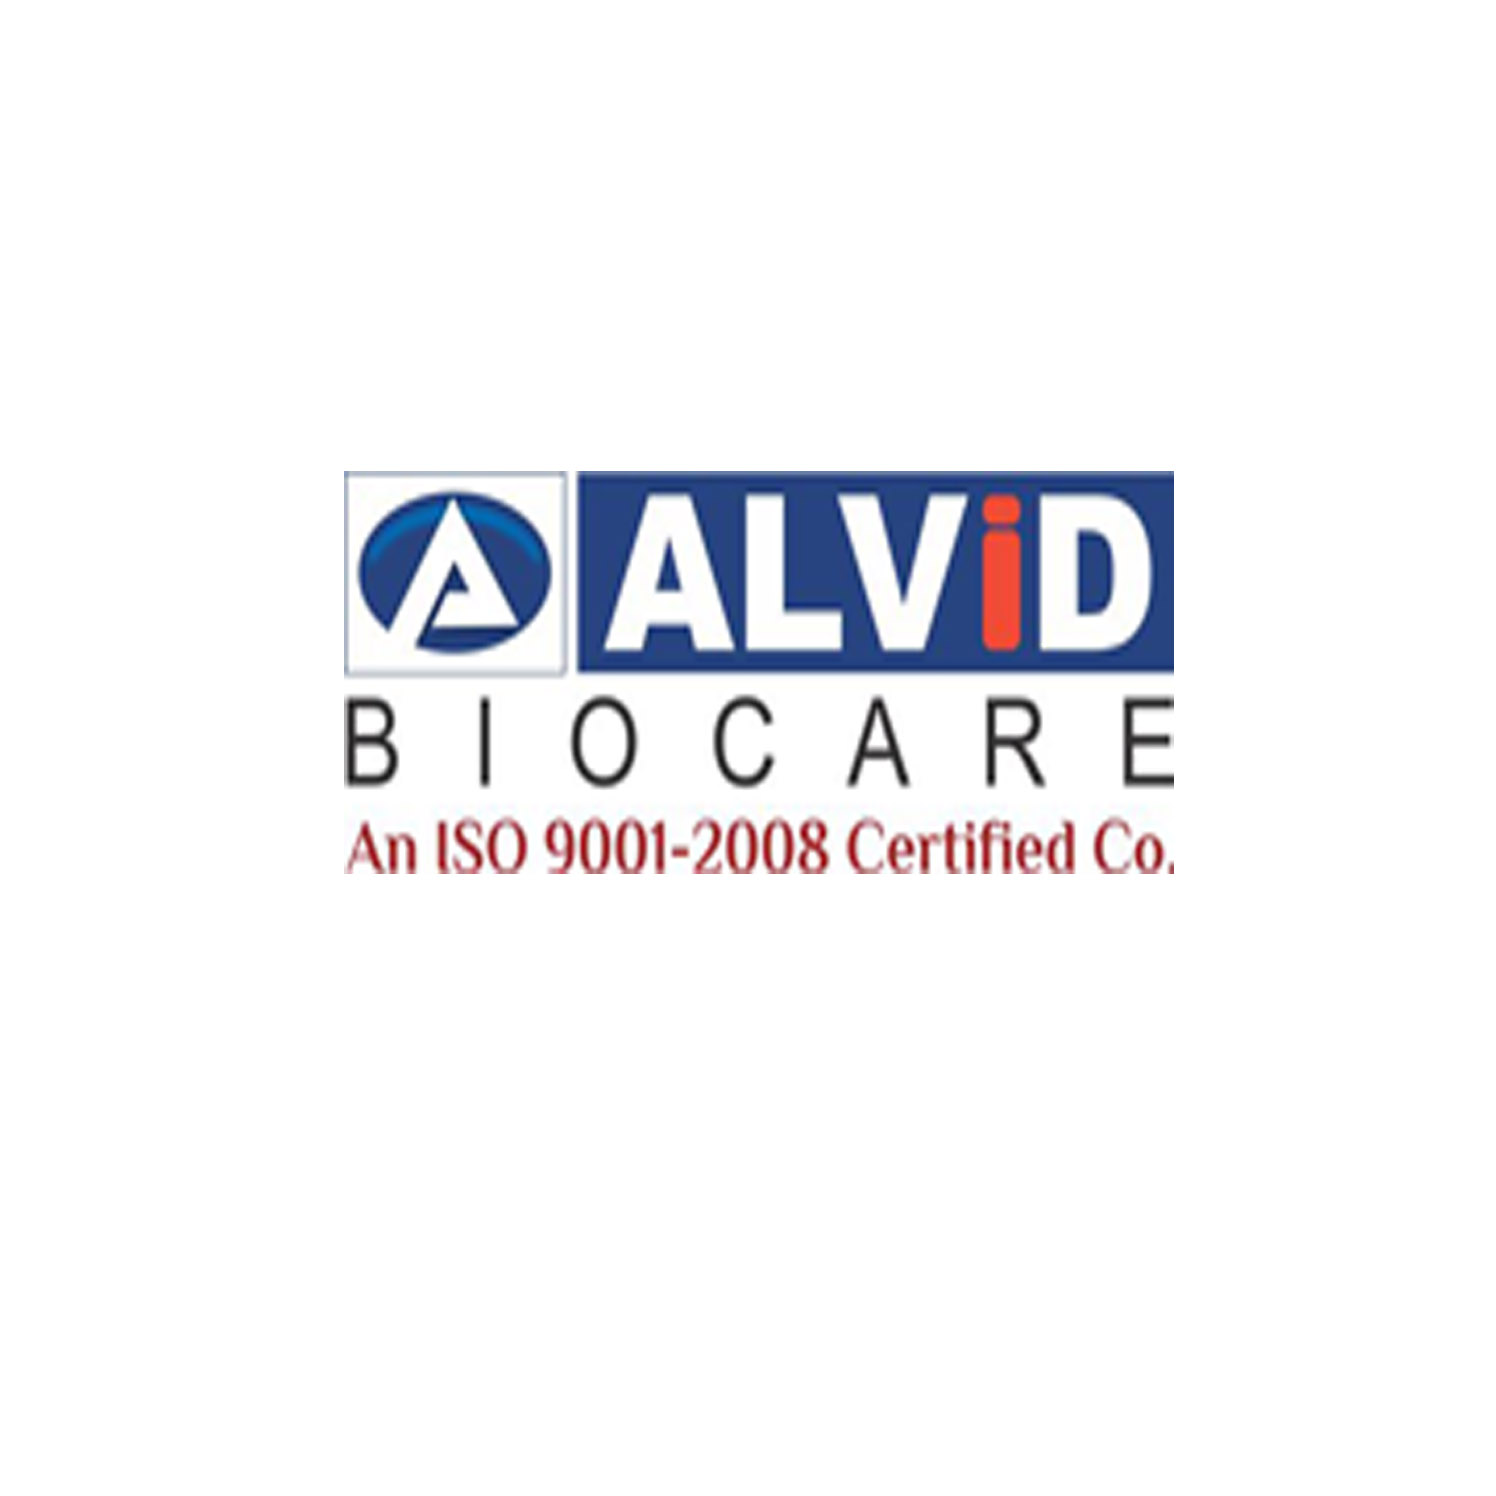 Top Third Party Pharma Manufacturer in India